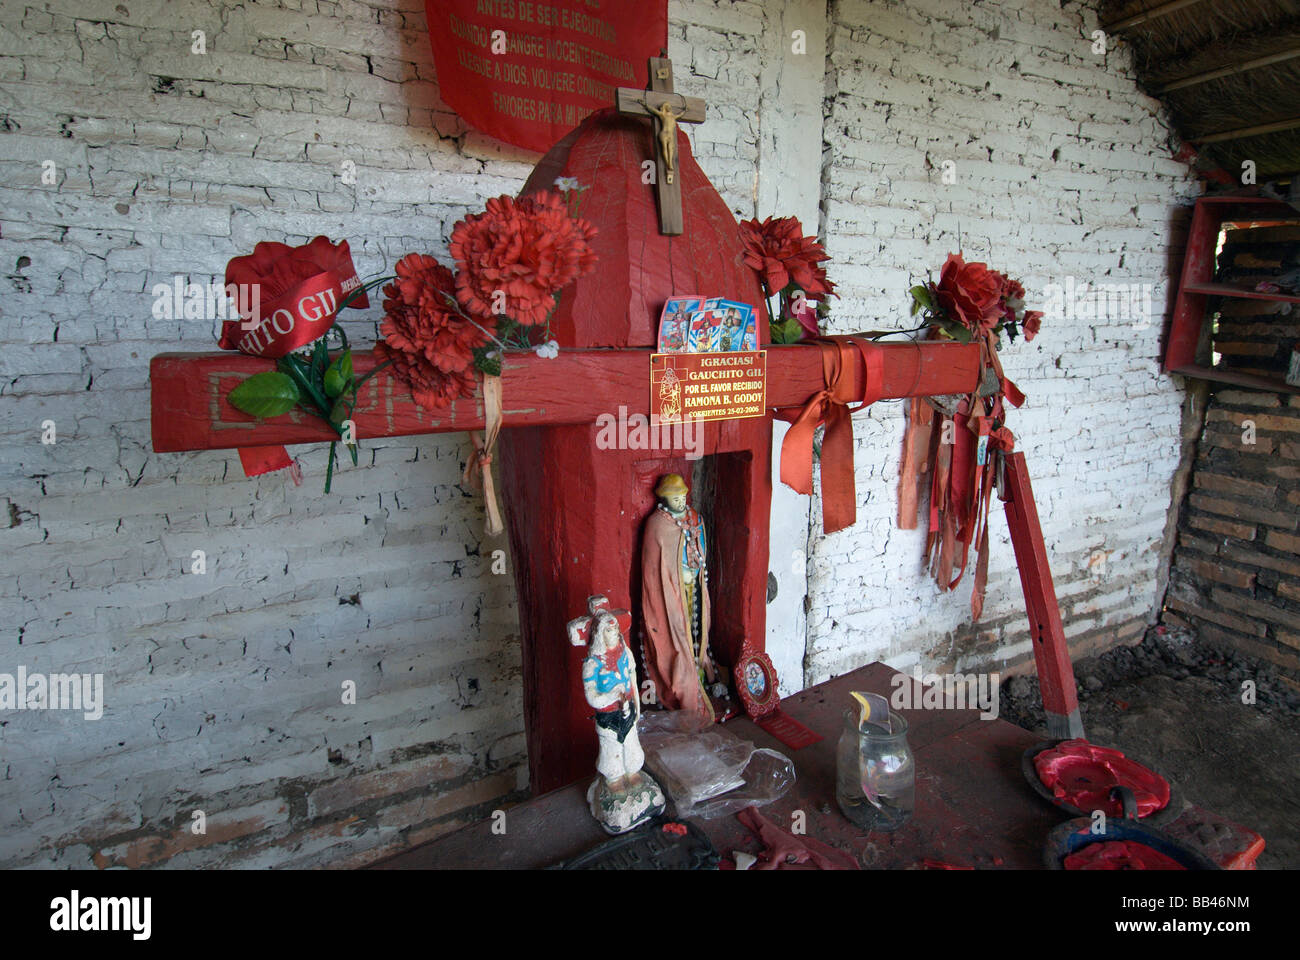 A shrine to Gauchito Gil, a  religious cult figure in Argentina,  popular especially amongst rural workers and gauchos in the No Stock Photo